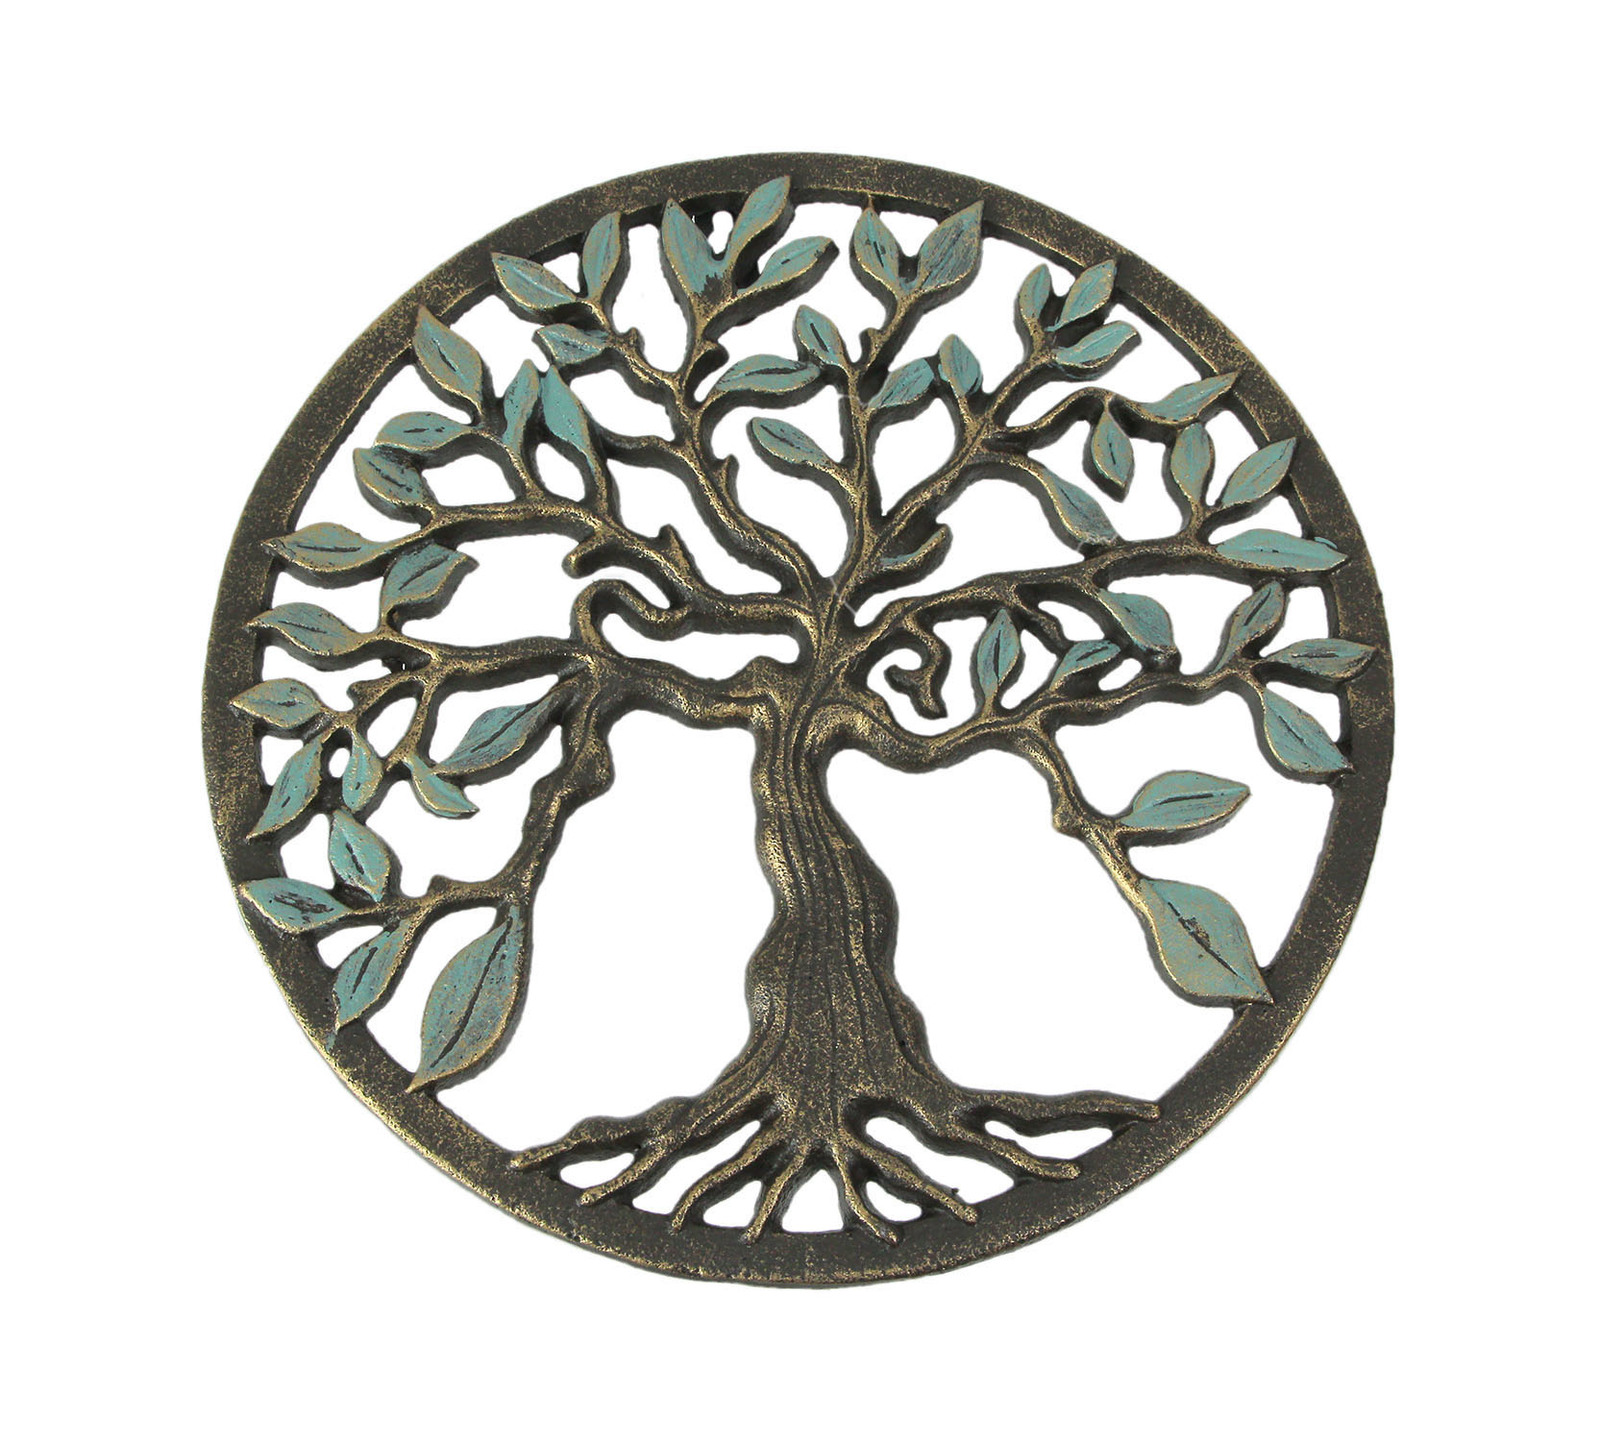 Primary image for Bronze Finished Cast Iron Tree Of Life Wall Hanging 11.75 Inches In Diameter